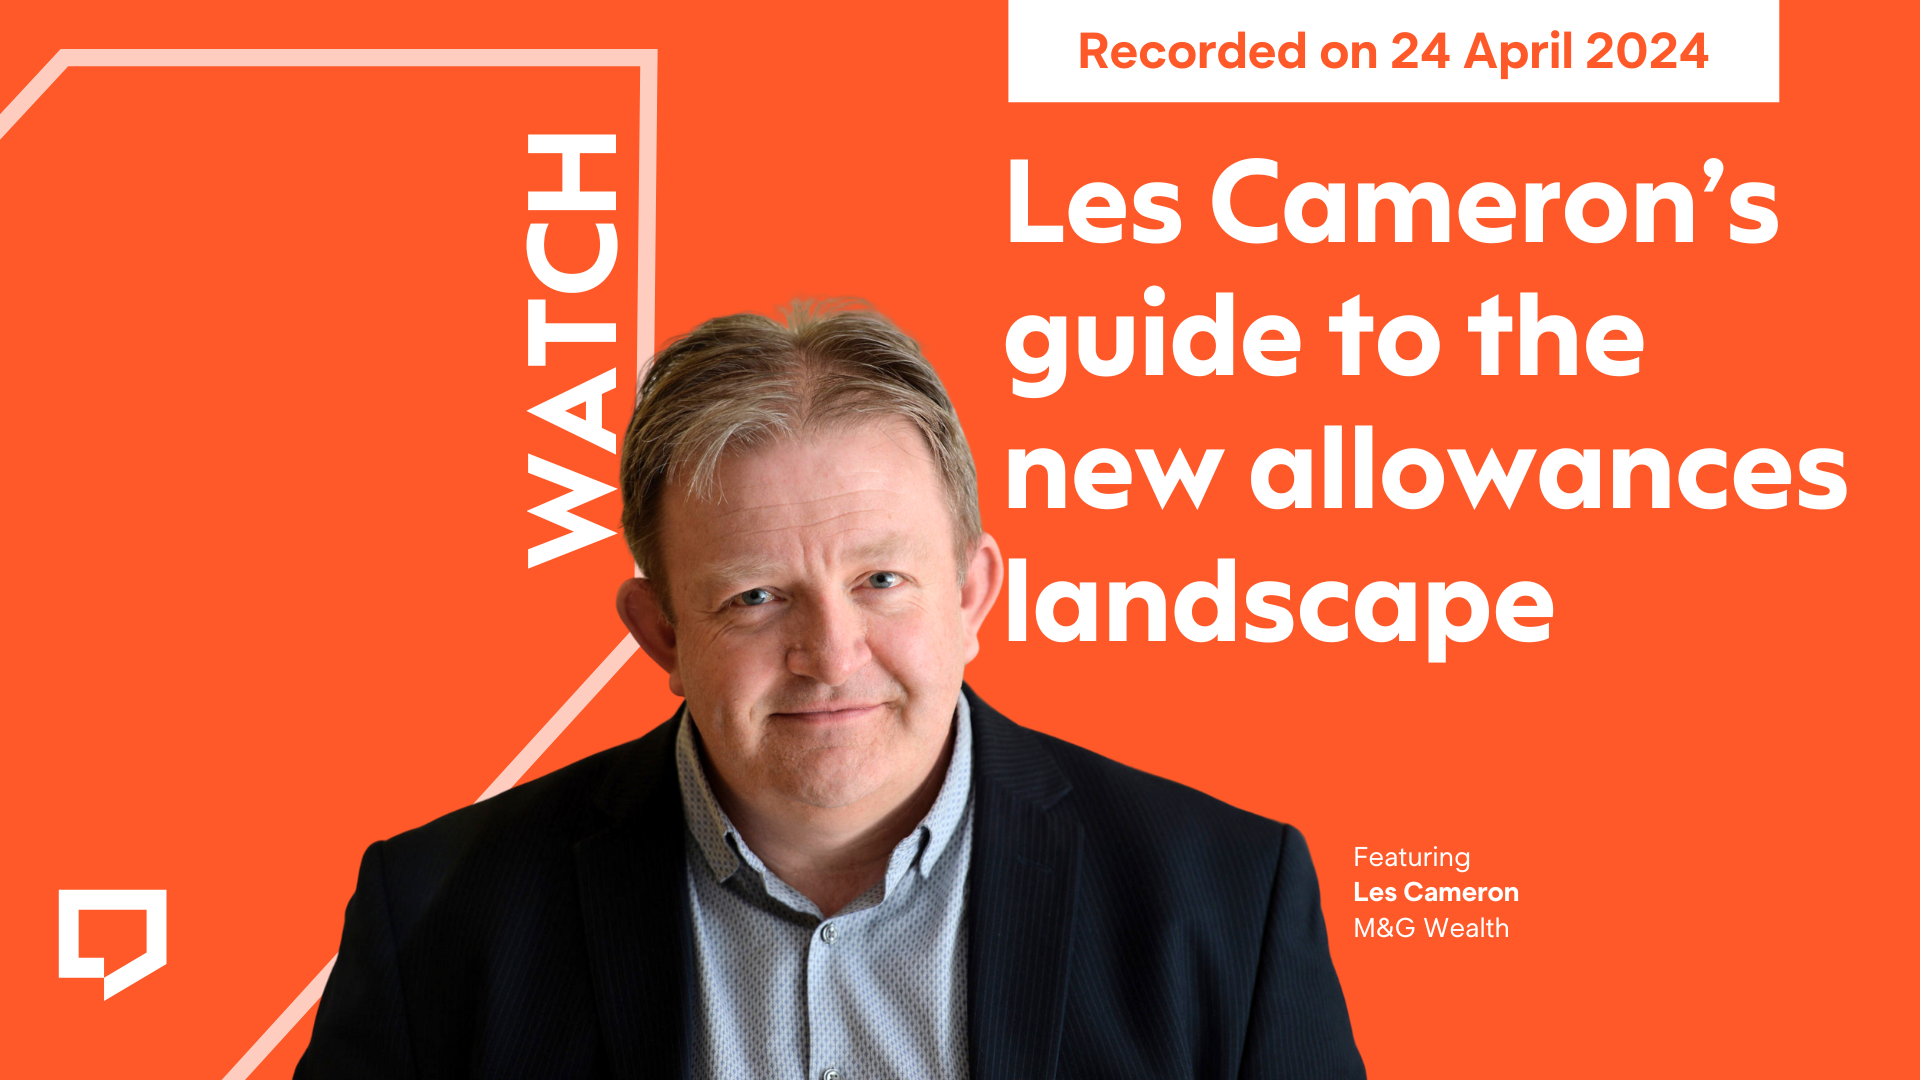 Video cover image features a head and shoulder picture of Les Cameron. Text reads: Recorded on 24 April 2024. Les Cameron's guide to the new allowances landscape featuring Les Cameron of M&G Wealth